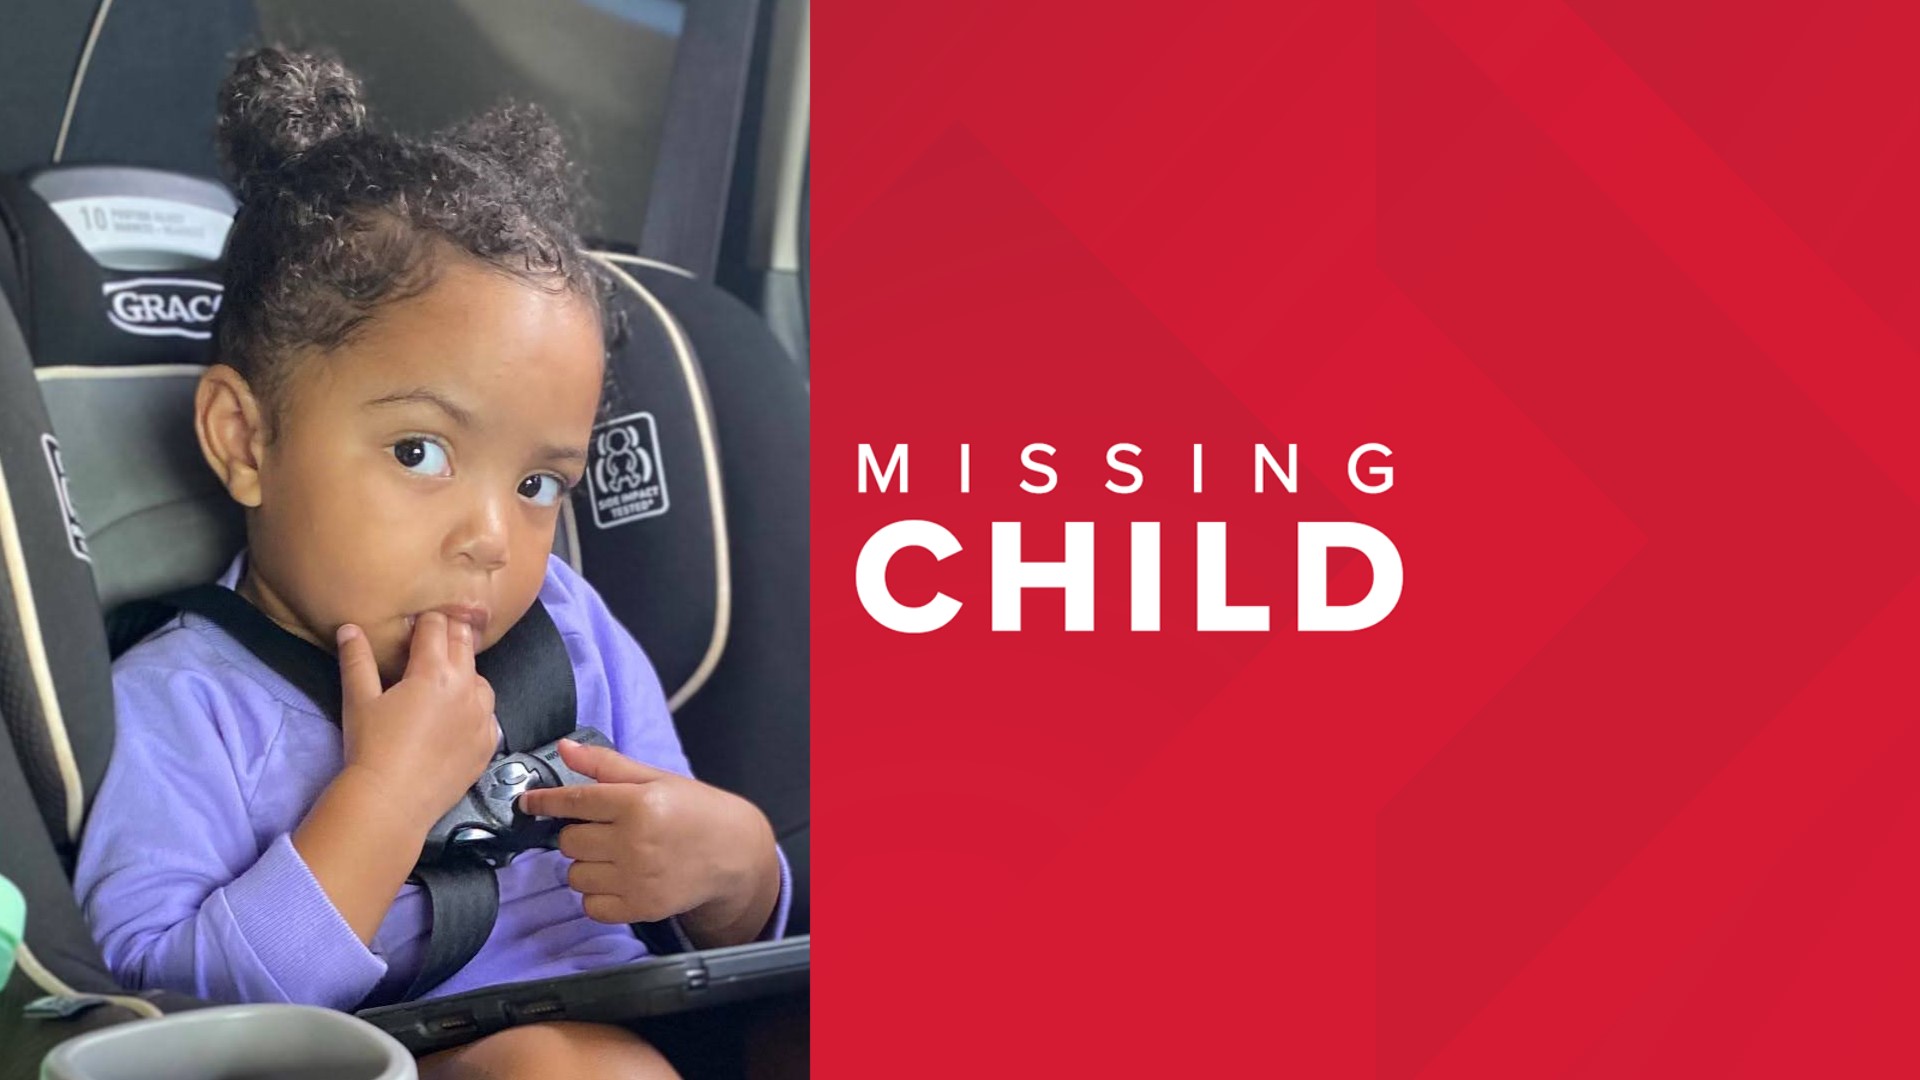 Authorities are searching for a 2-year-old girl who was abducted Wednesday, according to the Georgia Bureau of Investigation.